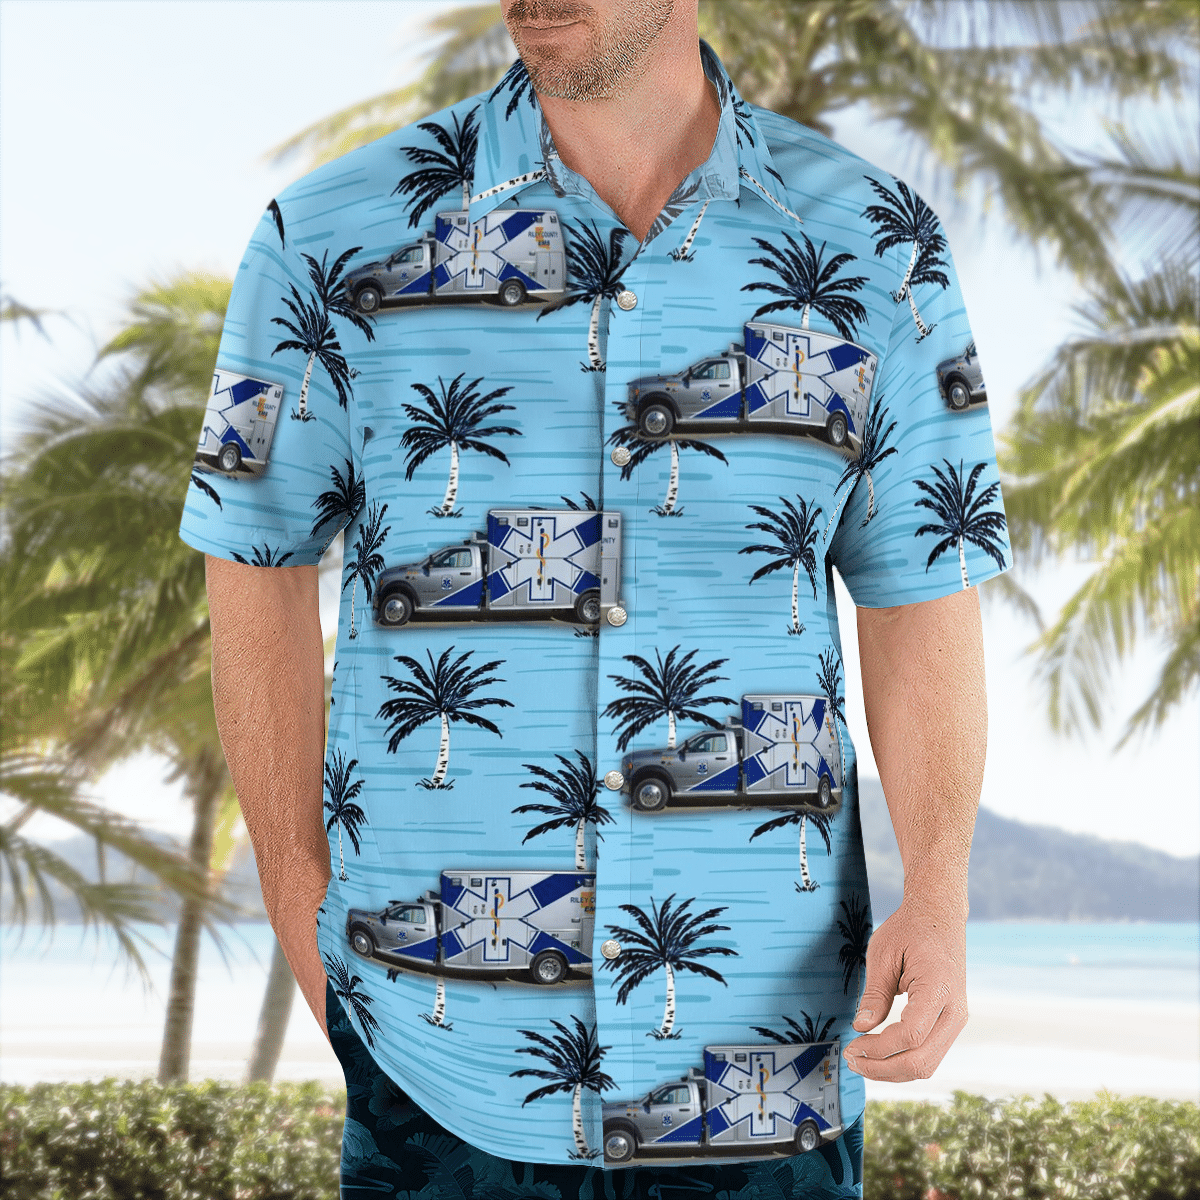 There are several styles of beach and Hawaiian shorts and tops to choose from 253